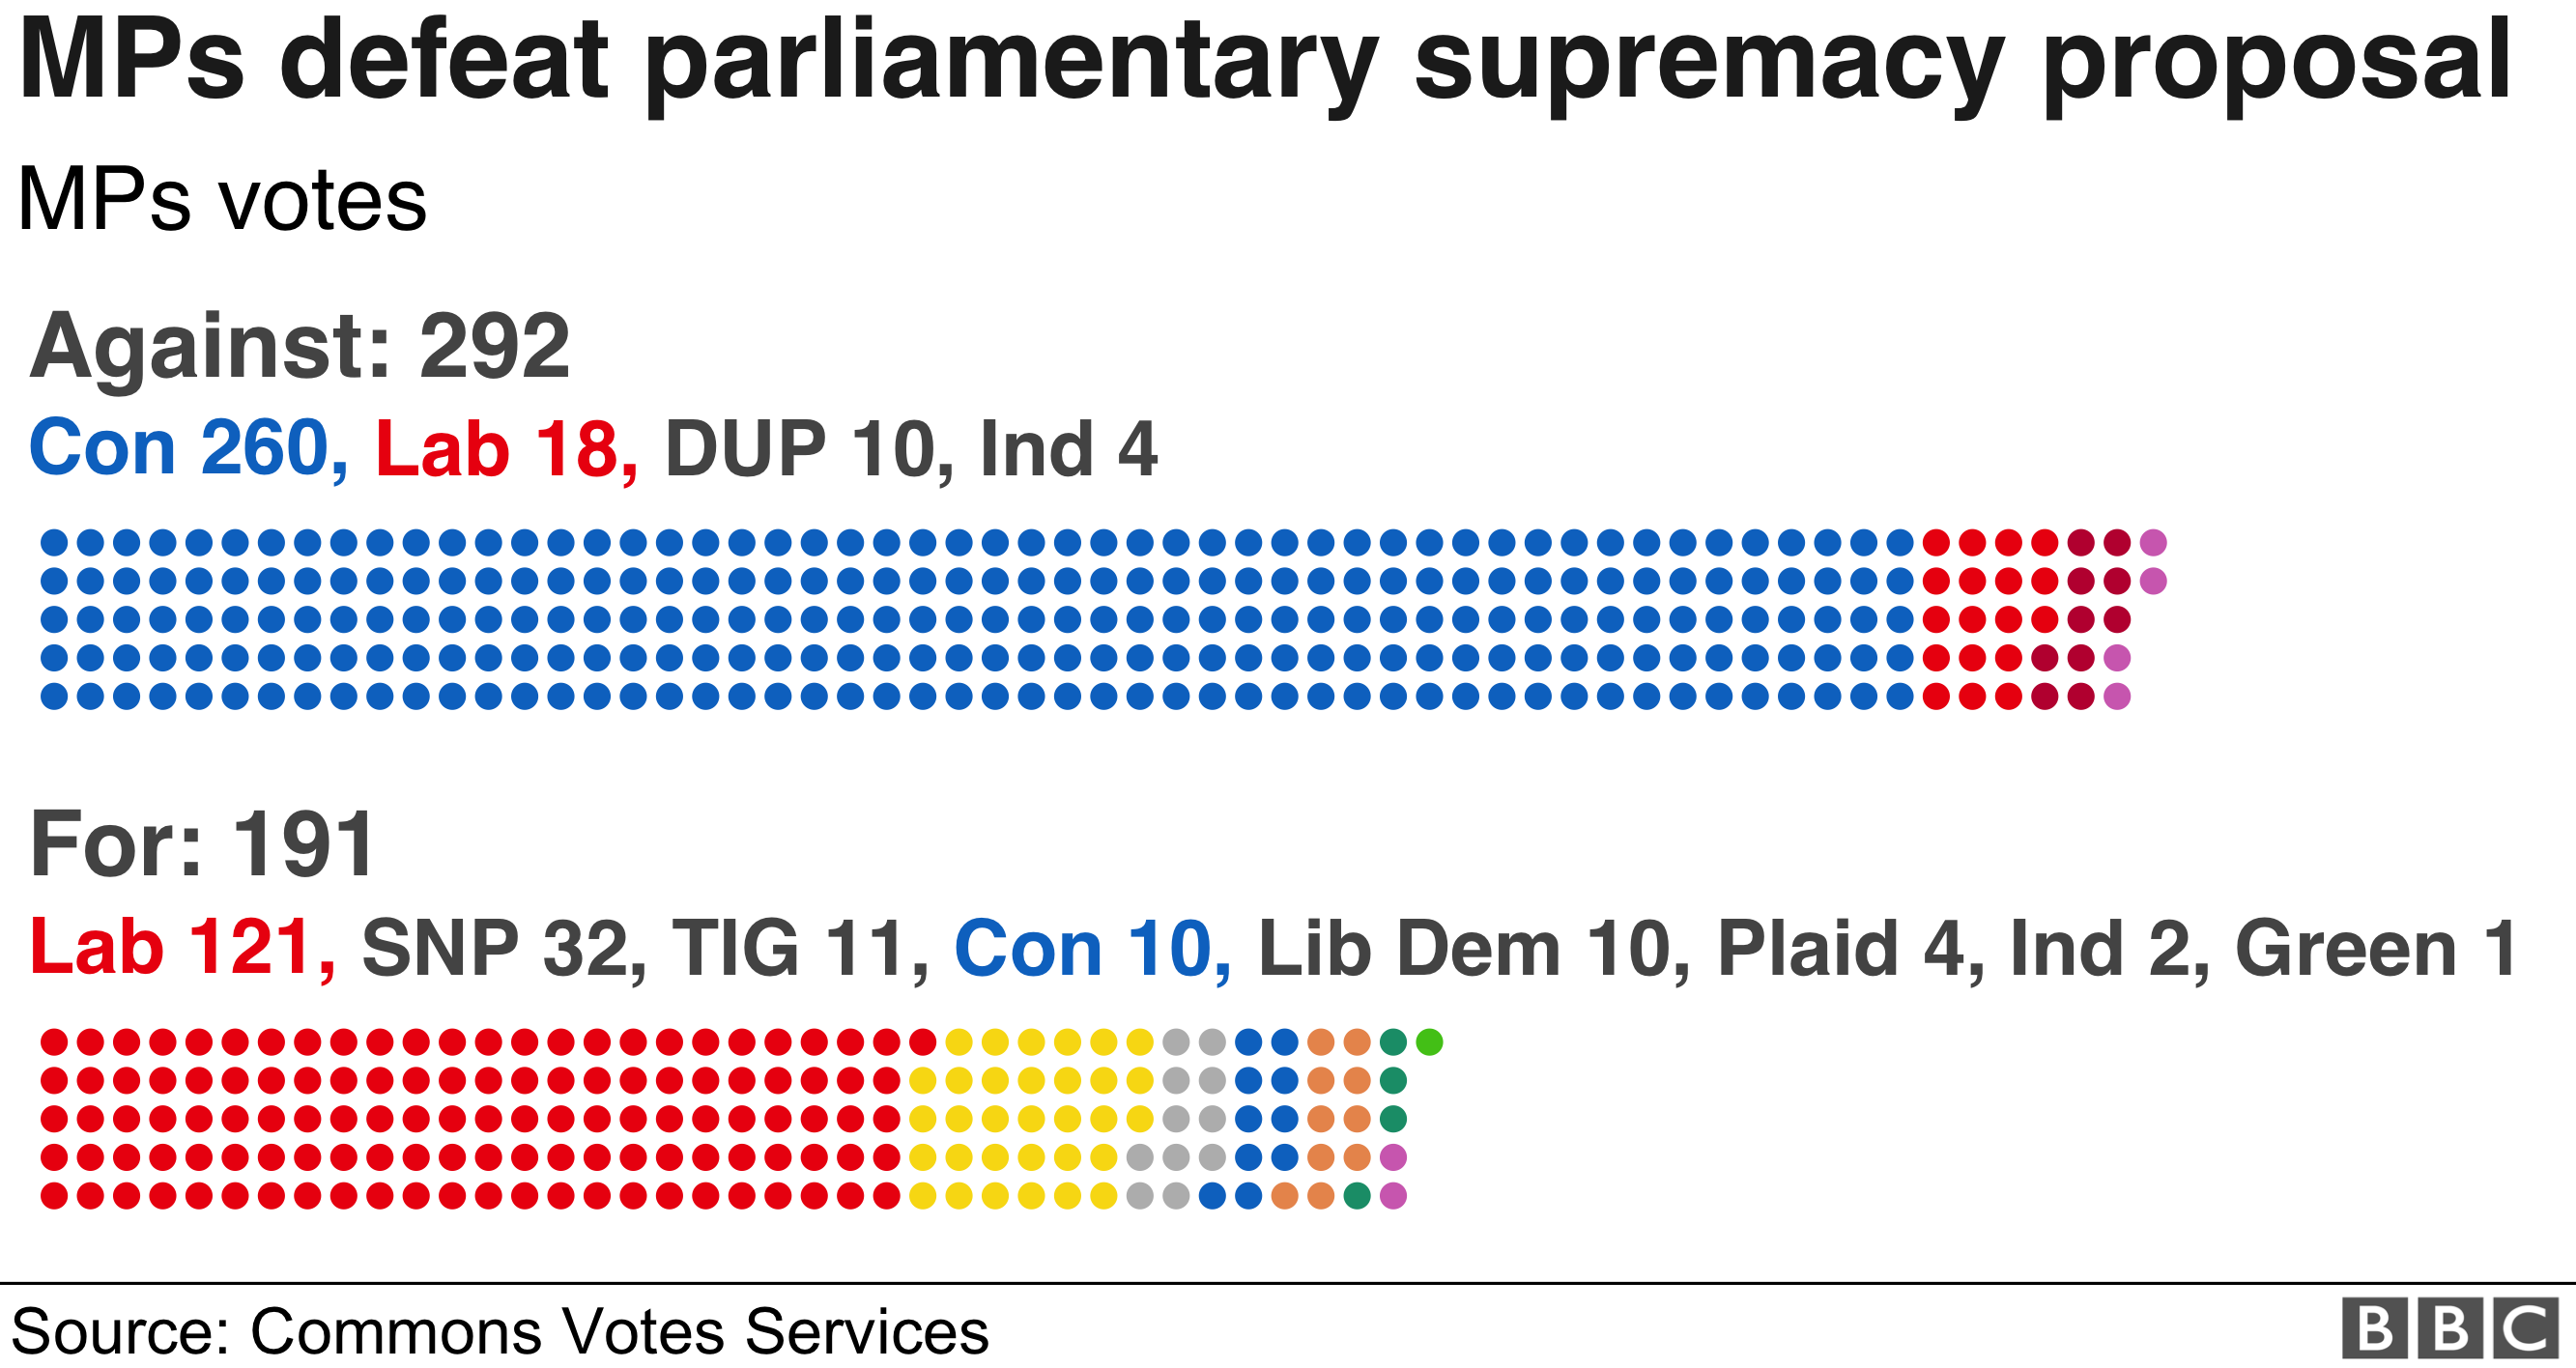 Graphic of parliamentary supremacy proposal